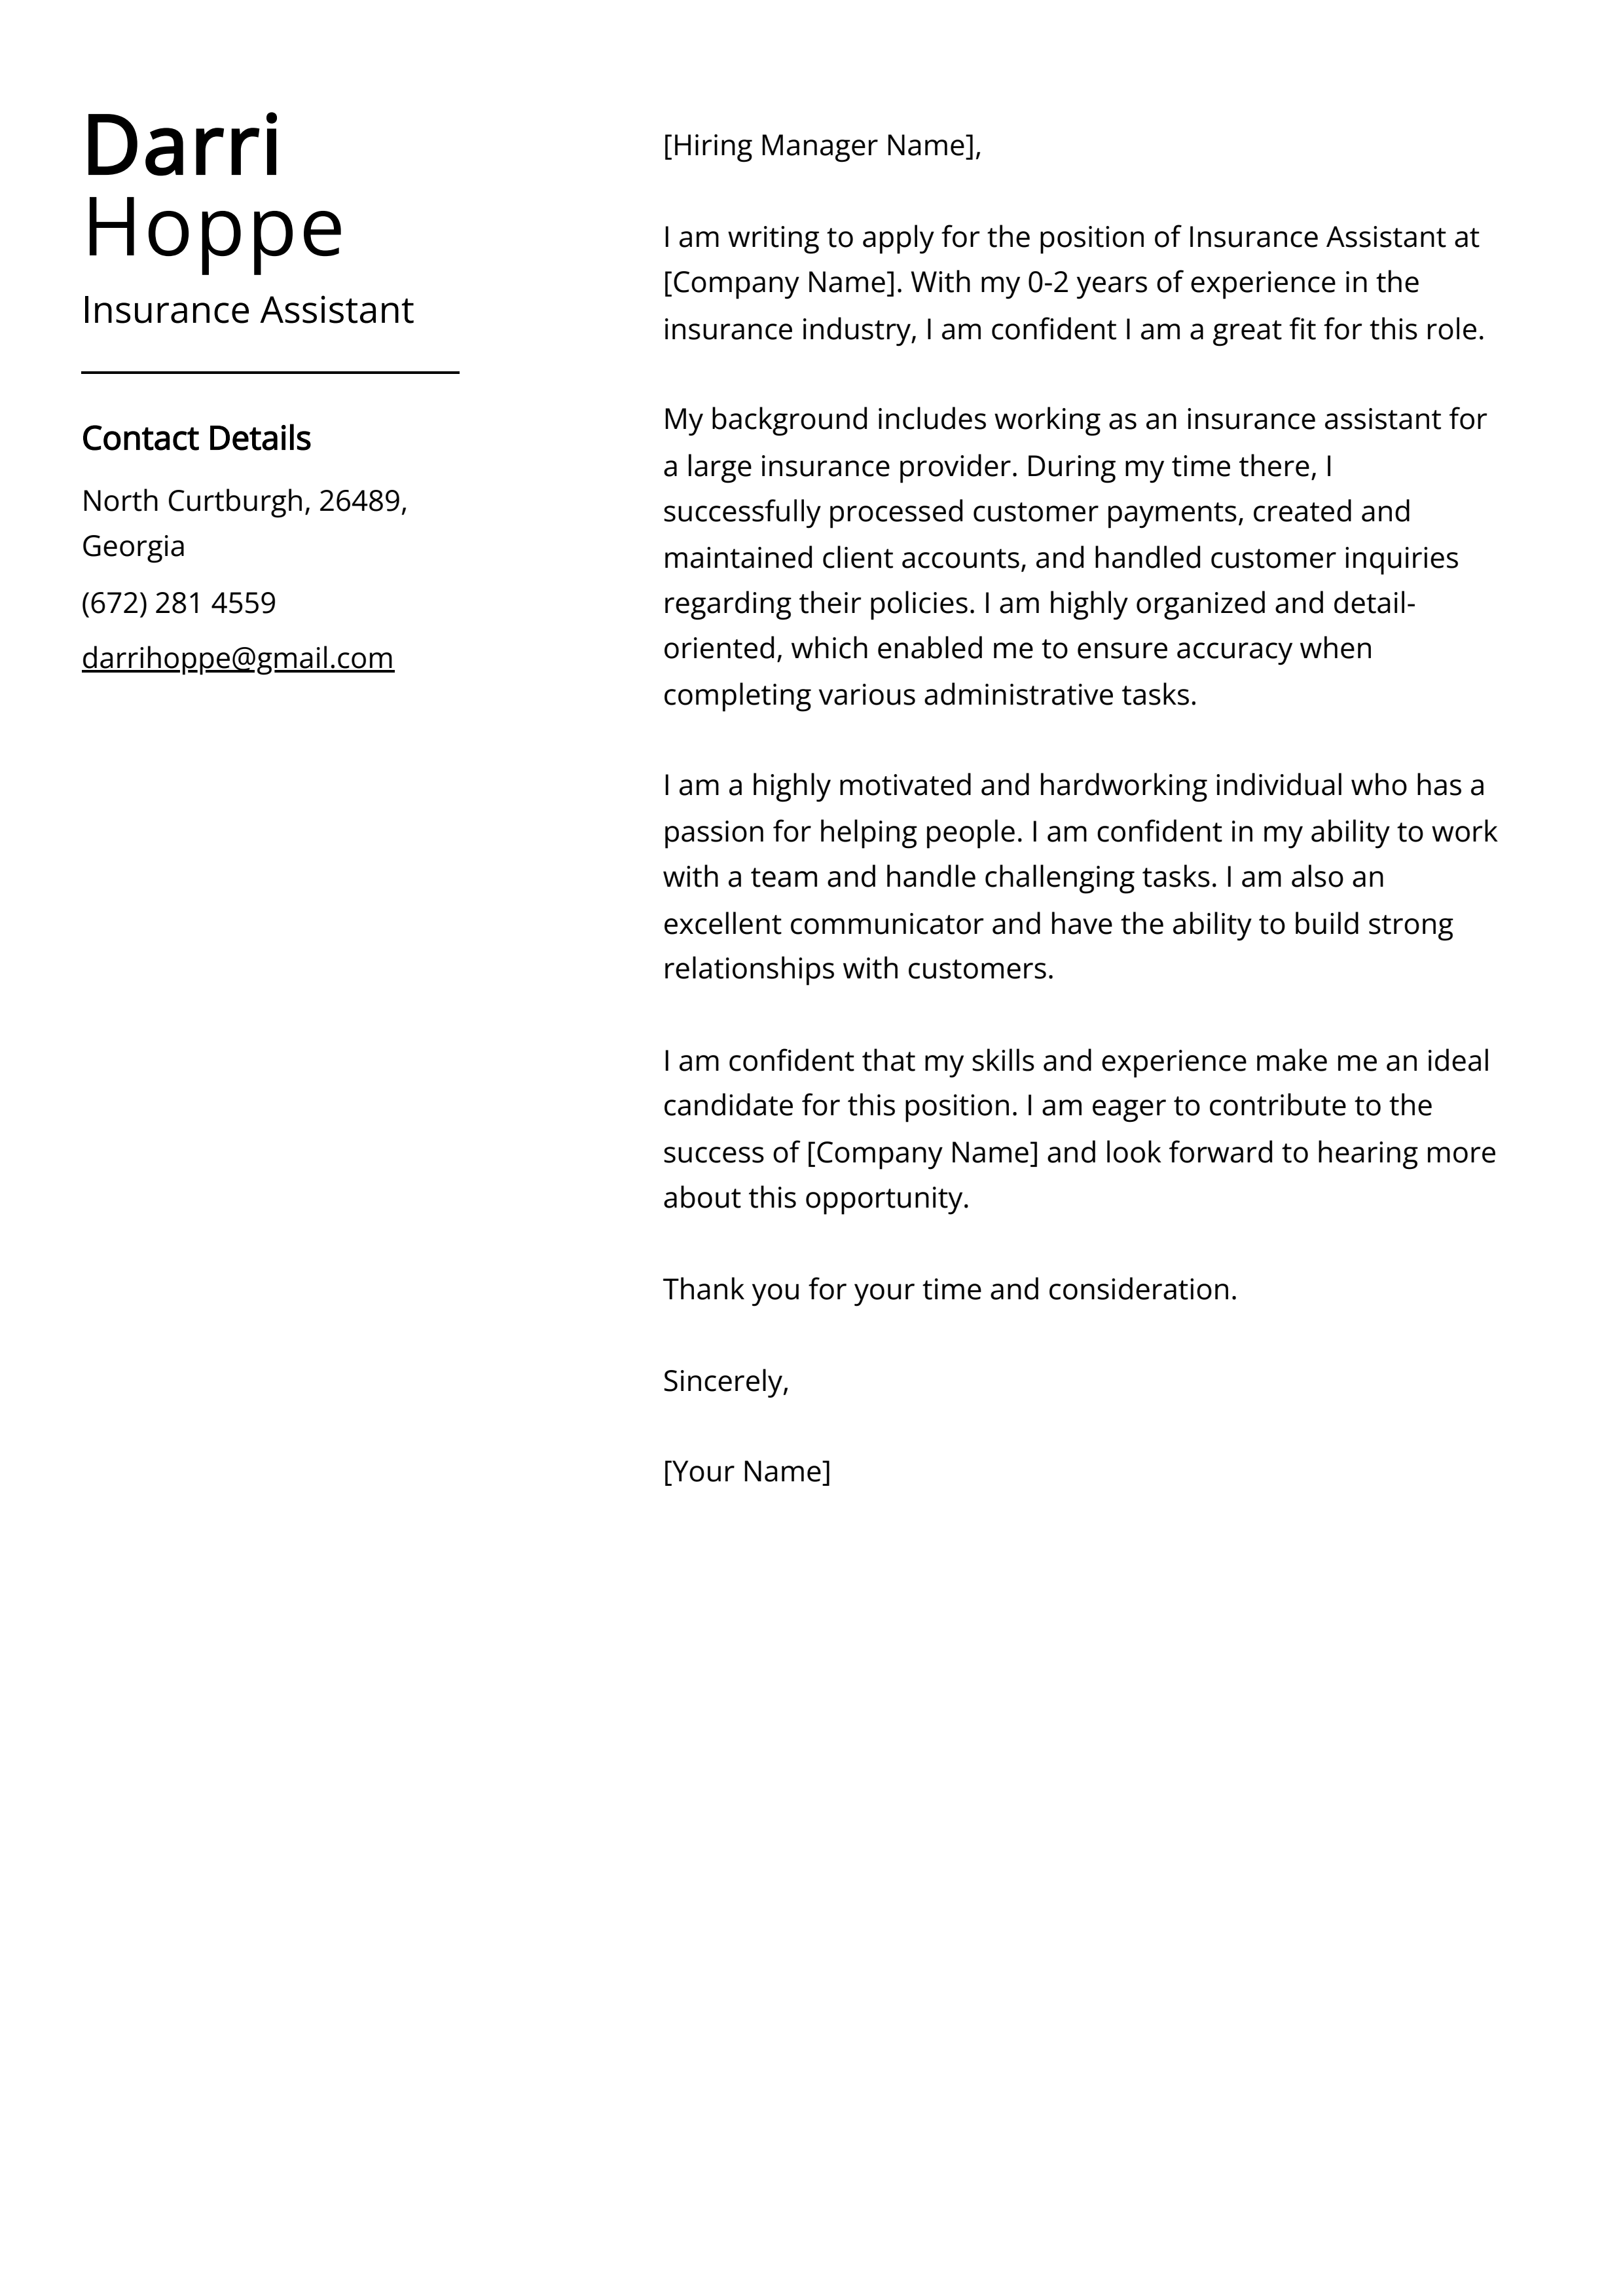 Insurance Assistant Cover Letter Example